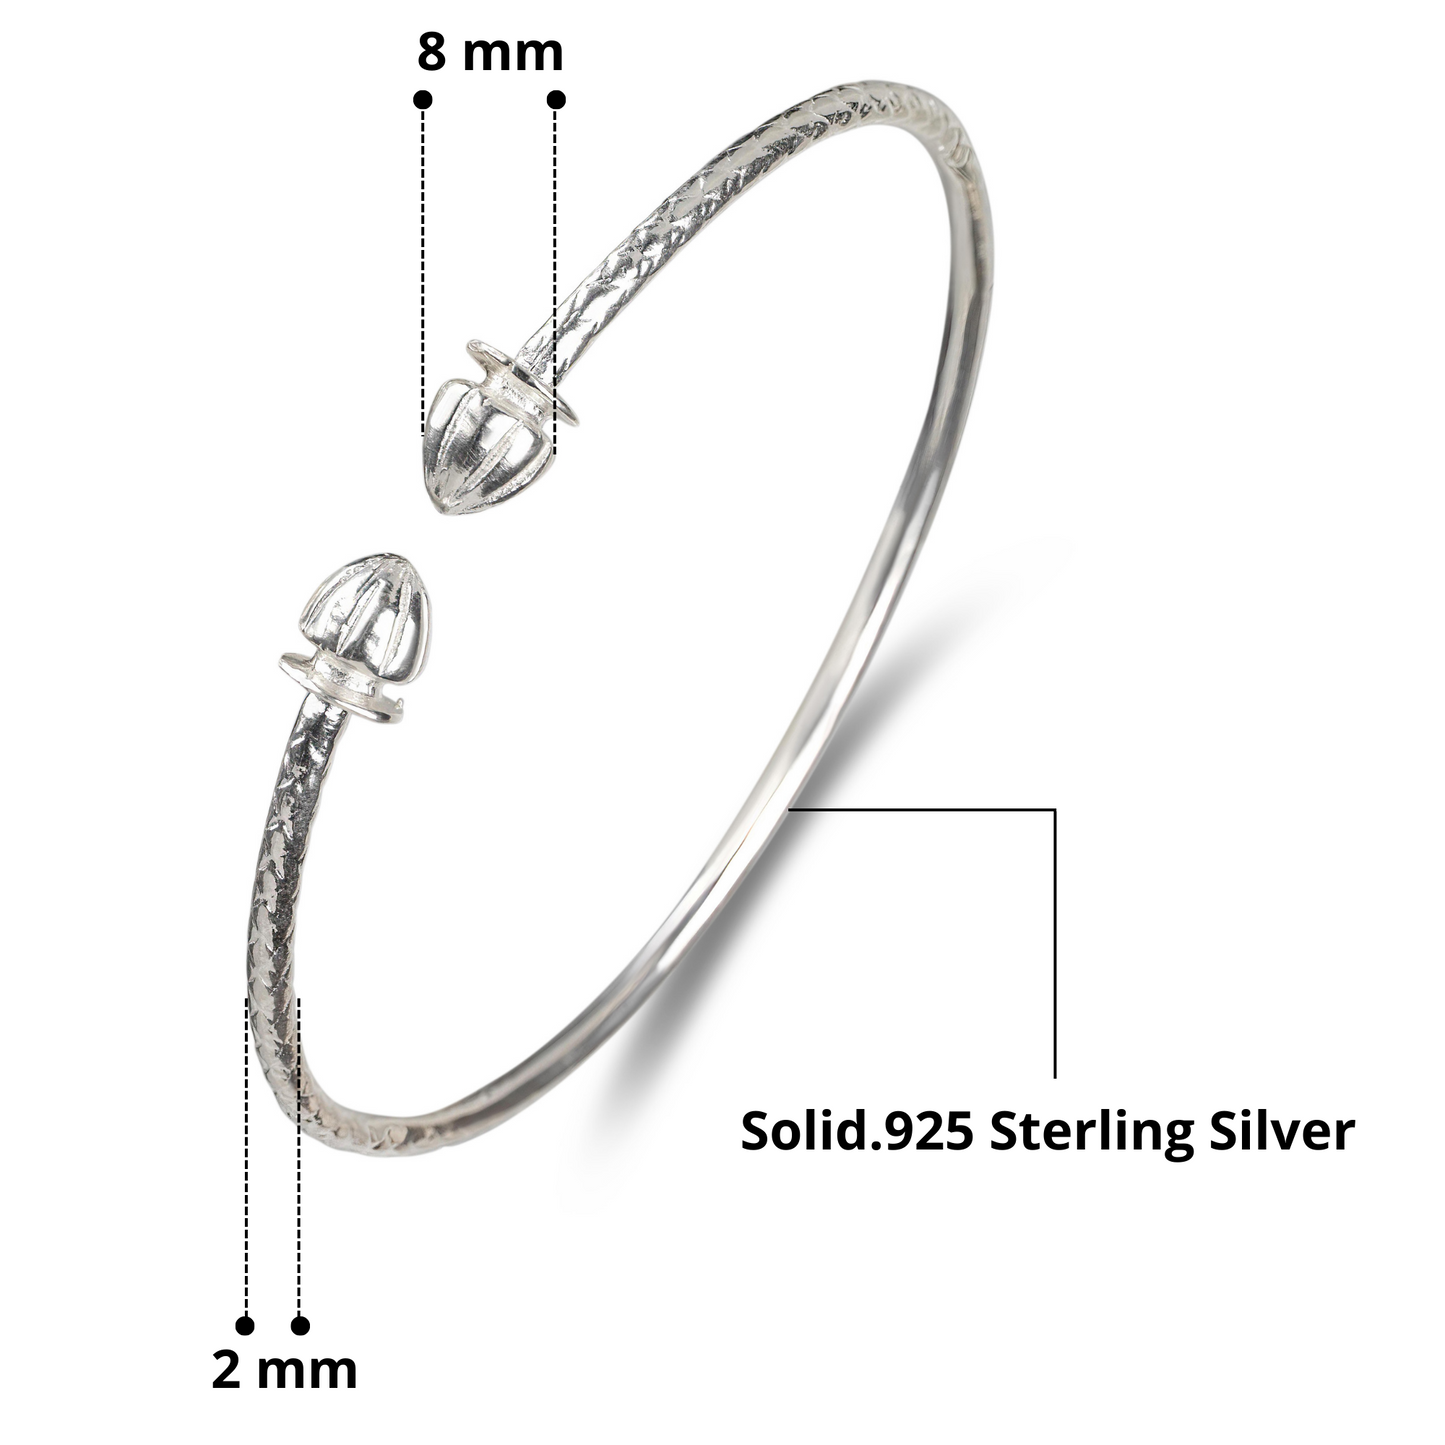 Better Jewelry Acorn .925 Sterling Silver West Indian Bangles (Pair)